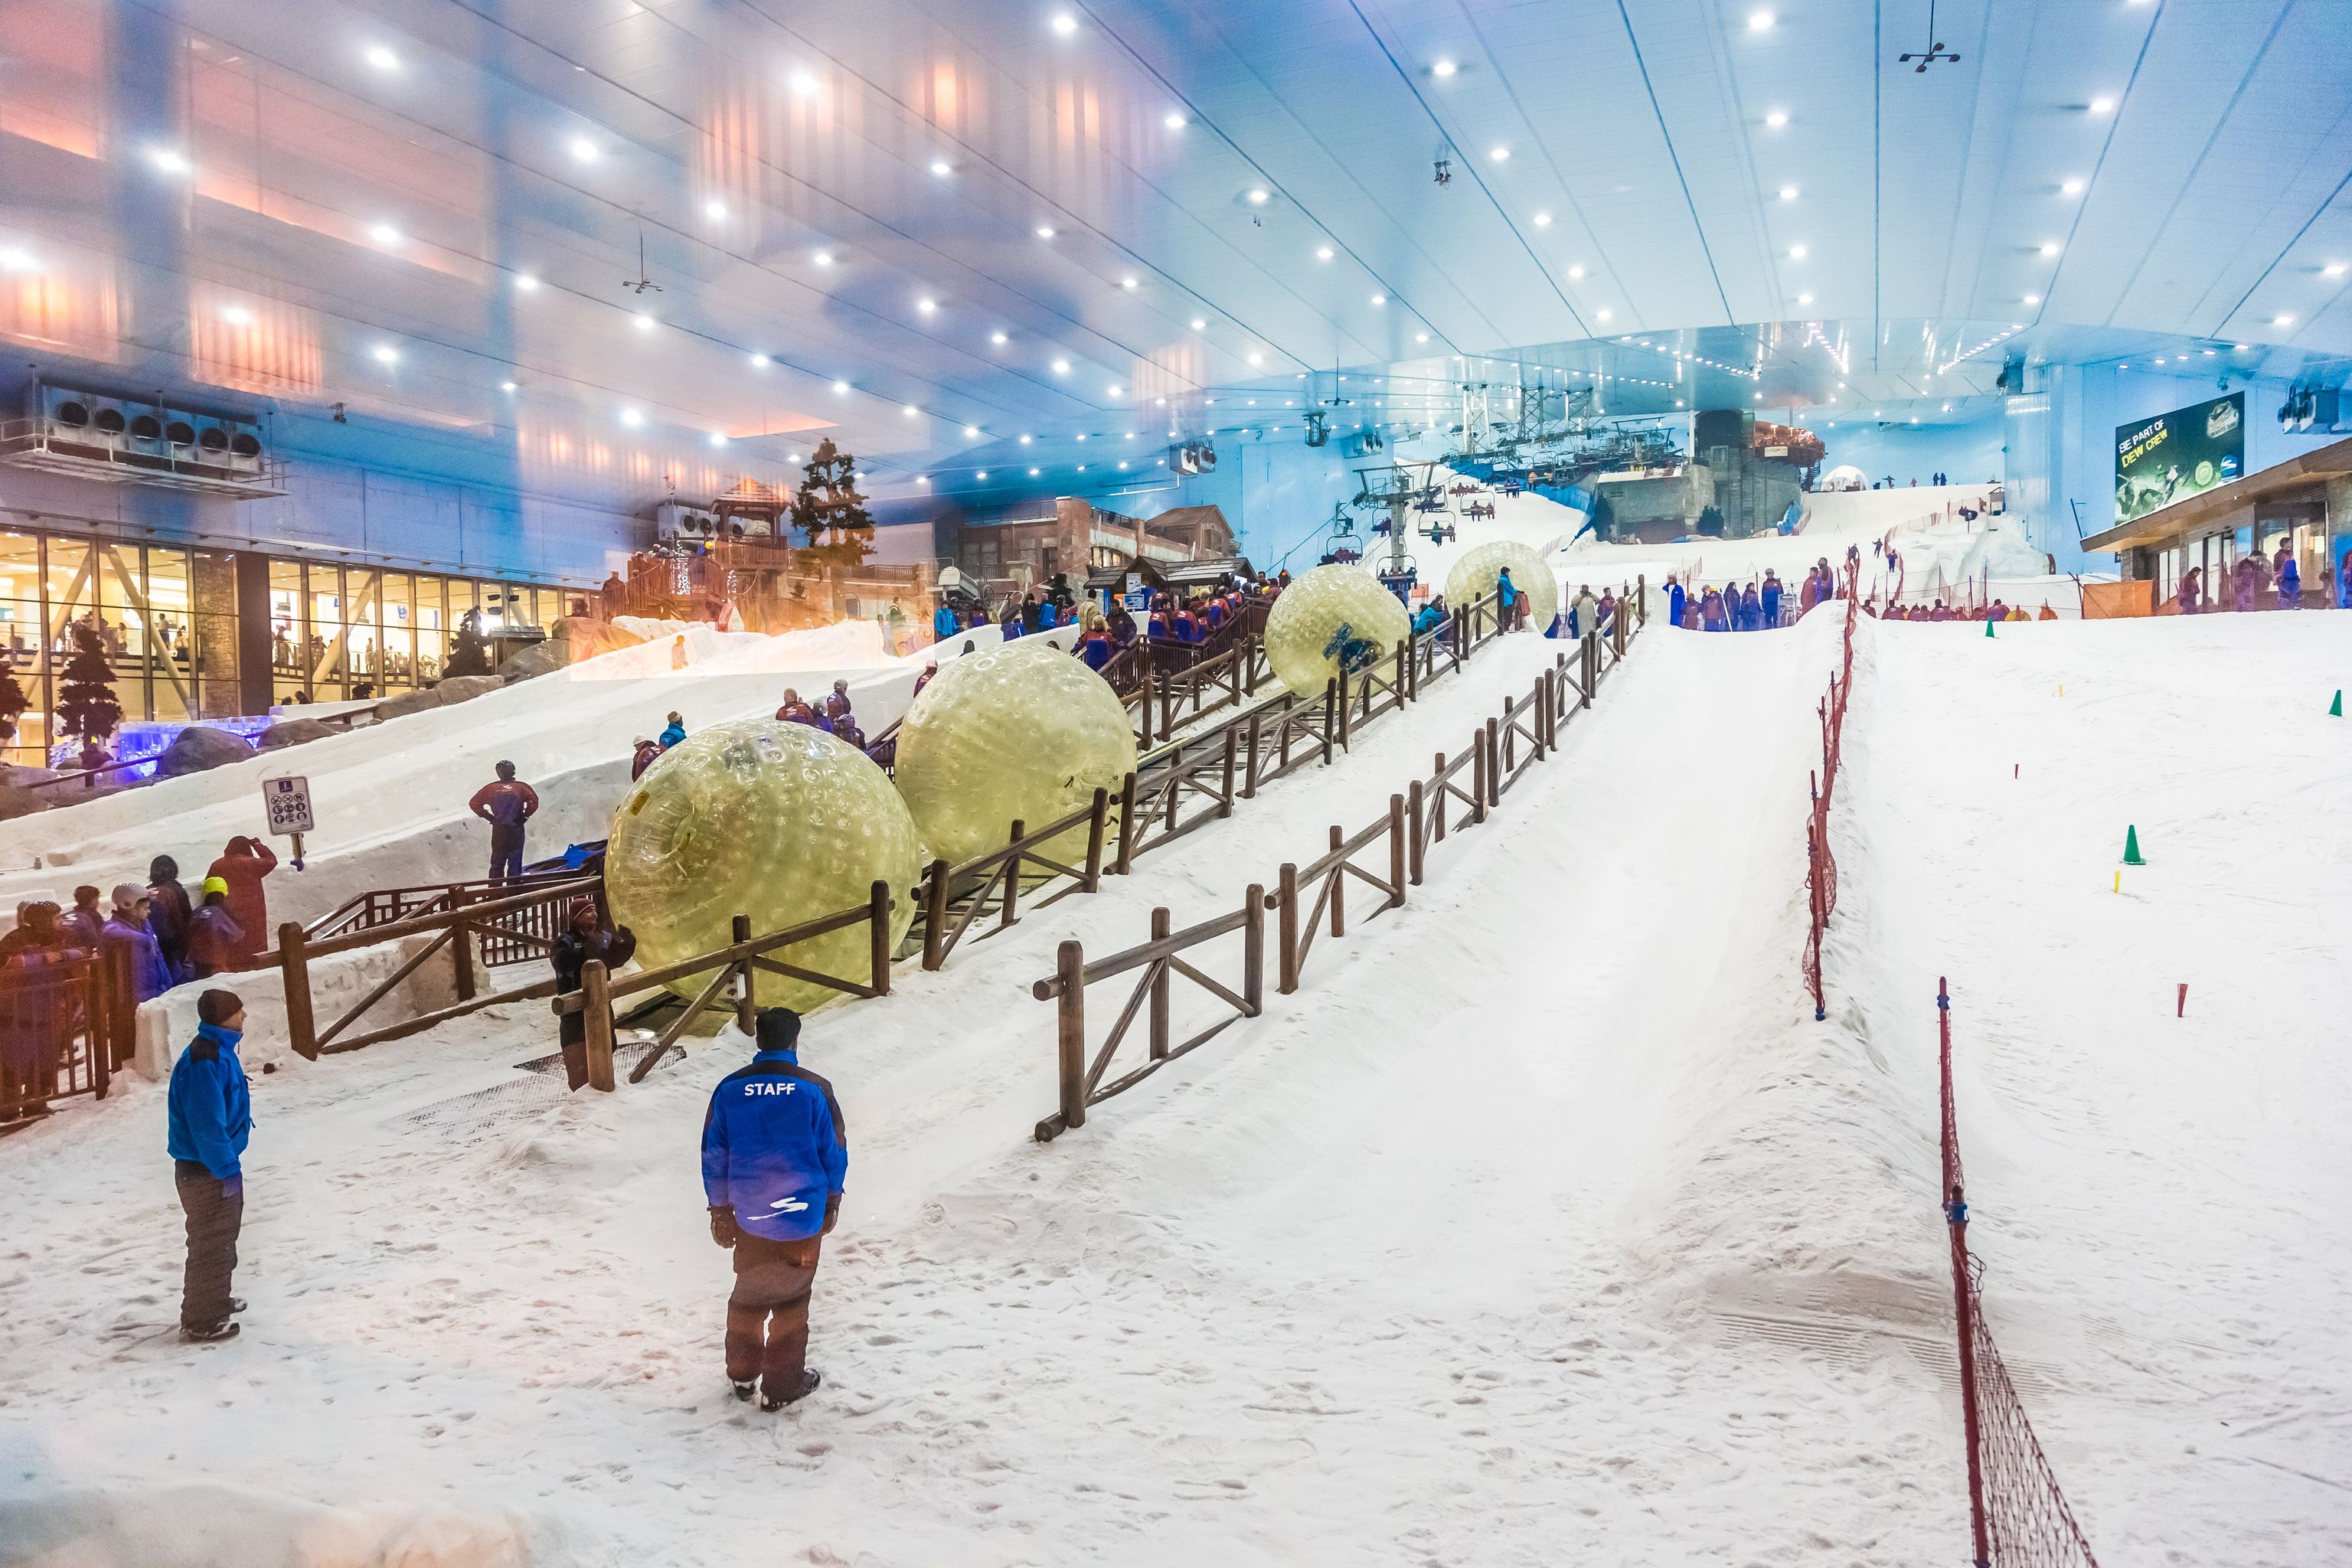 Snow Skiing In the Desert? – It Happens Only In Dubai